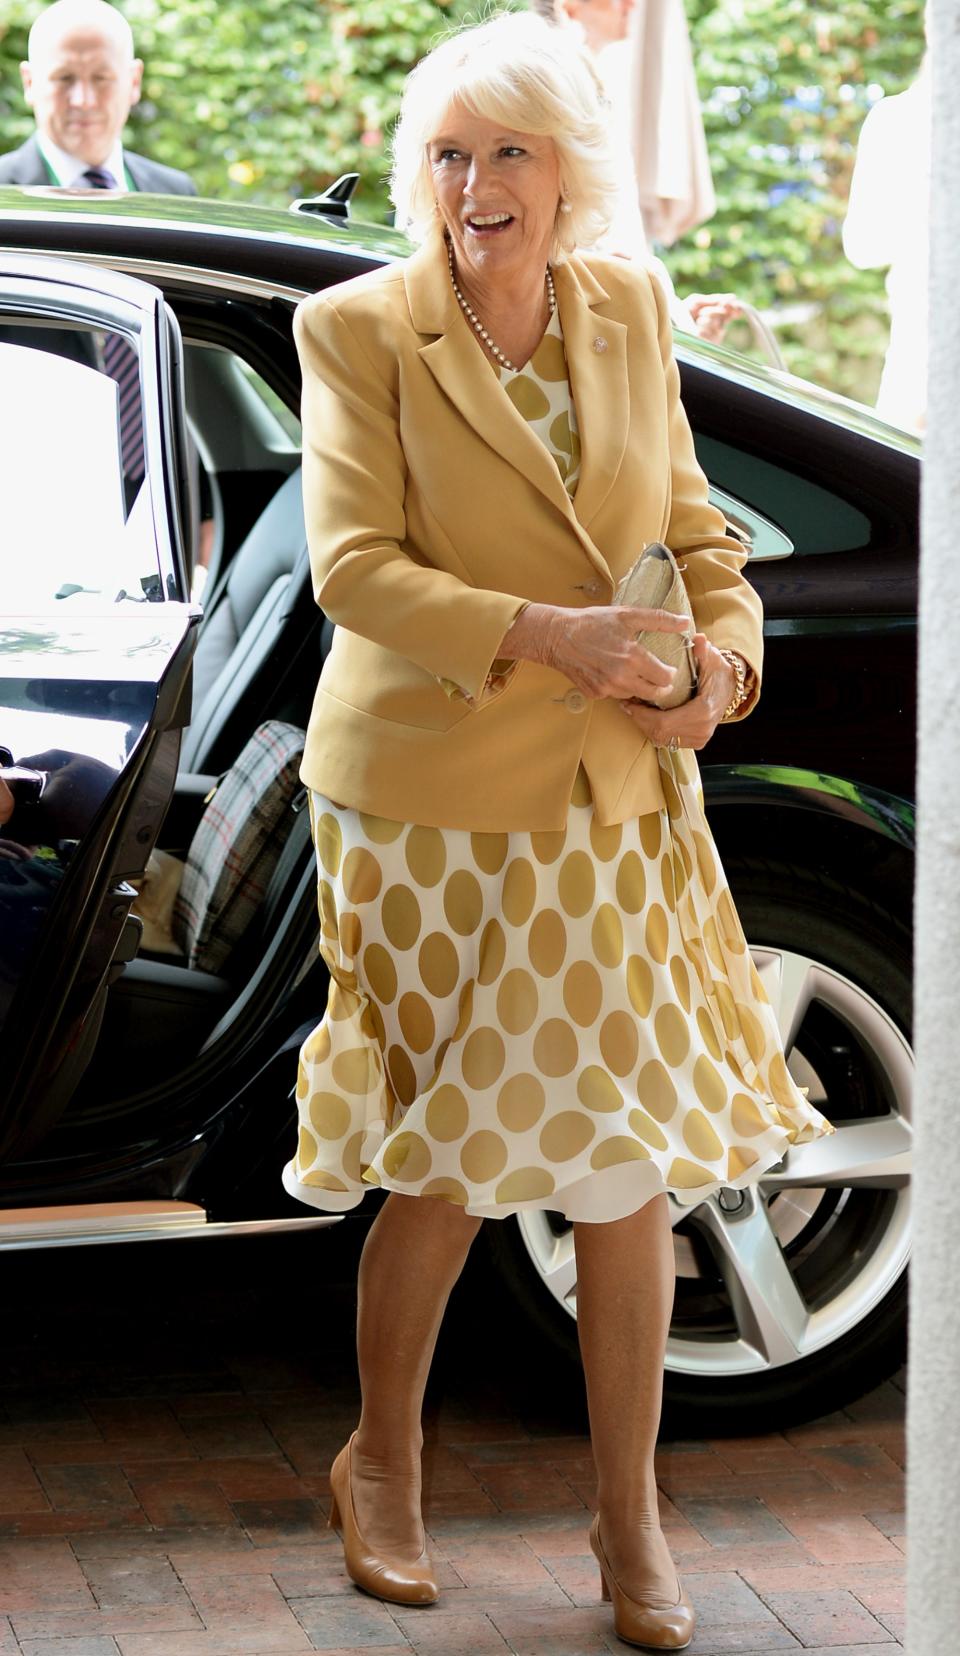 LONDON - JUNE 25: Camilla, Duchess of Cornwall arrives for day three of the Wimbledon Championships at the All England Lawn Tennis and Croquet Club, Wimbledon on June 25, 2014 in London, England. (Photo by Anthony Devlin - WPA Pool/Getty Images)